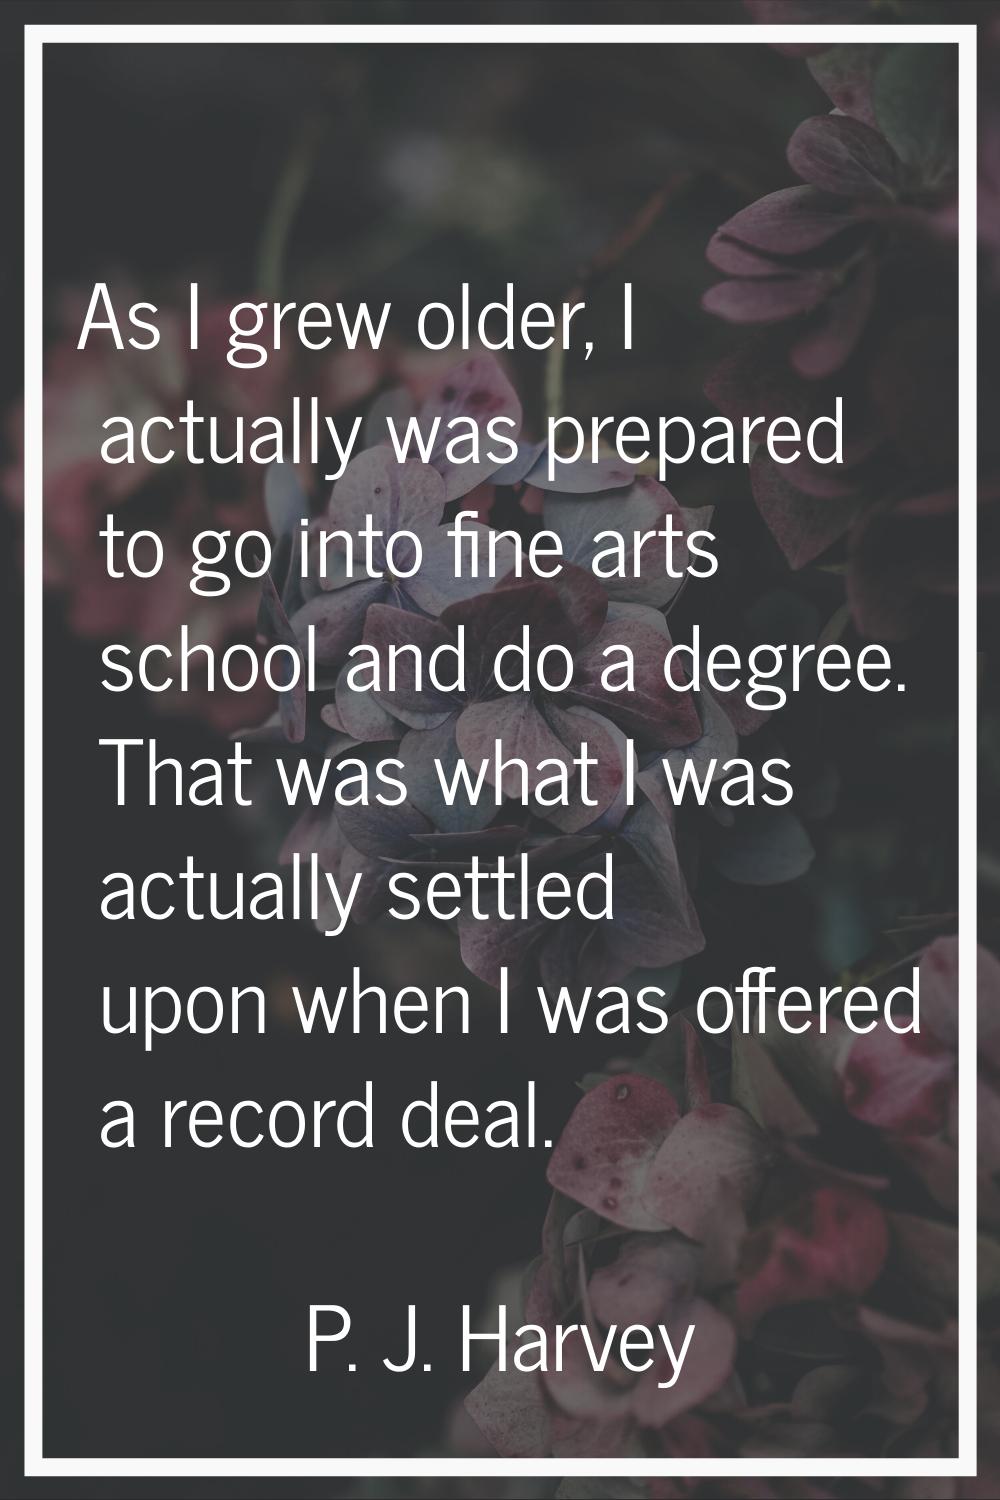 As I grew older, I actually was prepared to go into fine arts school and do a degree. That was what